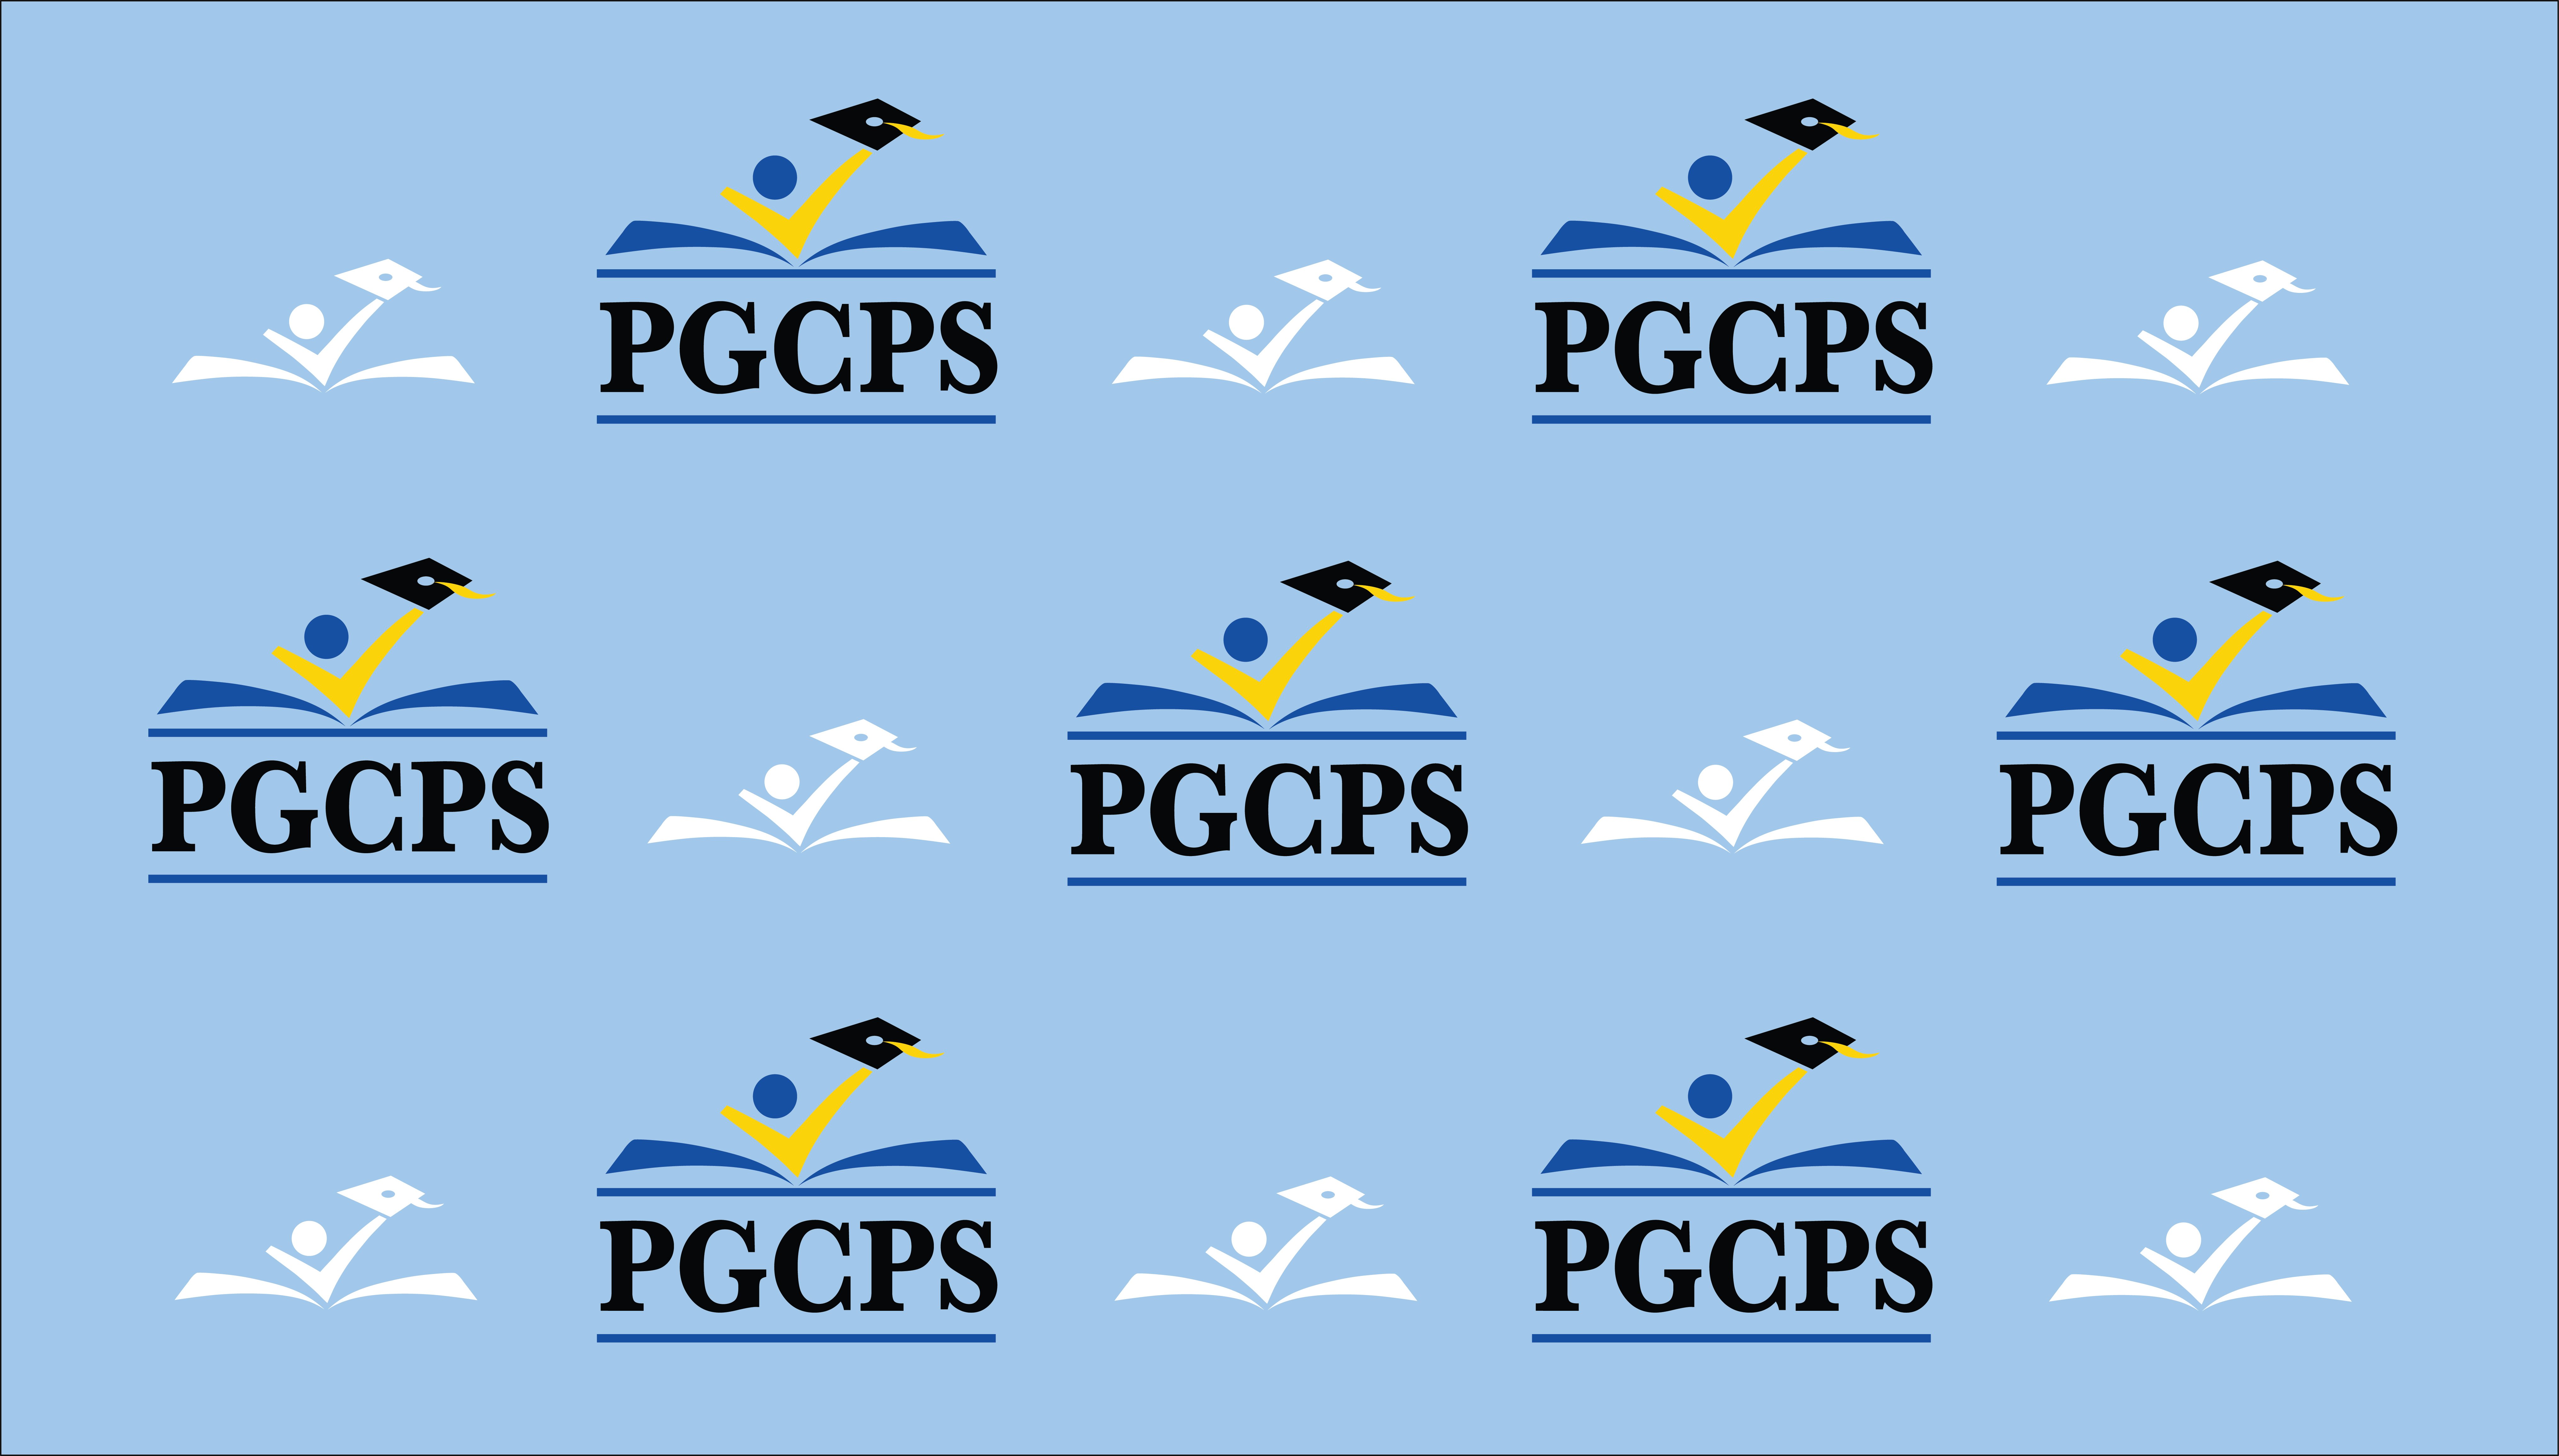 PGCPS Zoom Background with Logos.jpg